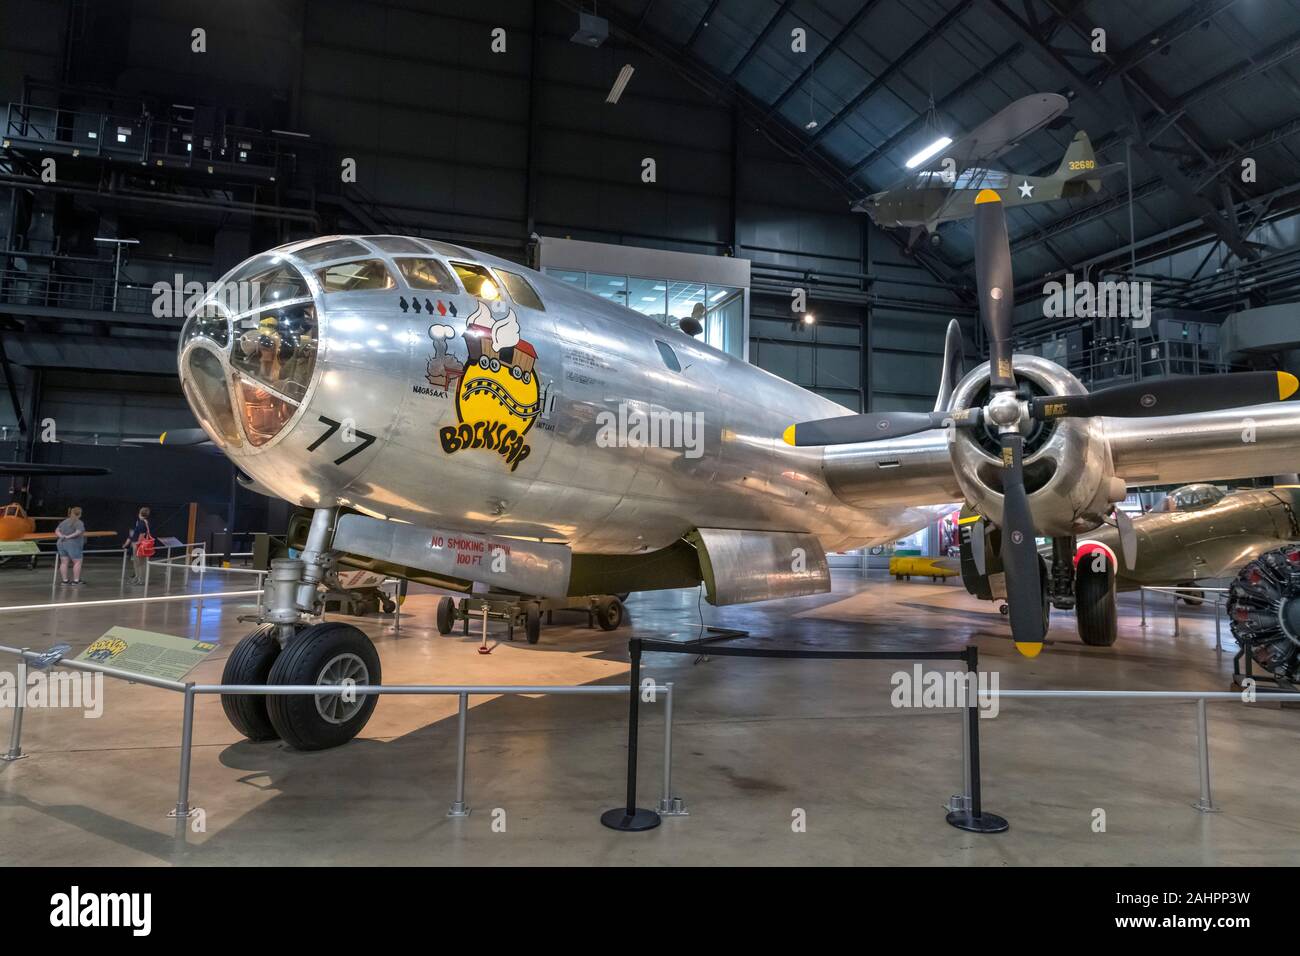 Bockscar, a World War II Boeing B-29 Superfortress, which dropped the Fat Man atomic bomb on Nagasaki, National Museum of the United States Air Force, Dayton, Ohio, USA. Stock Photo